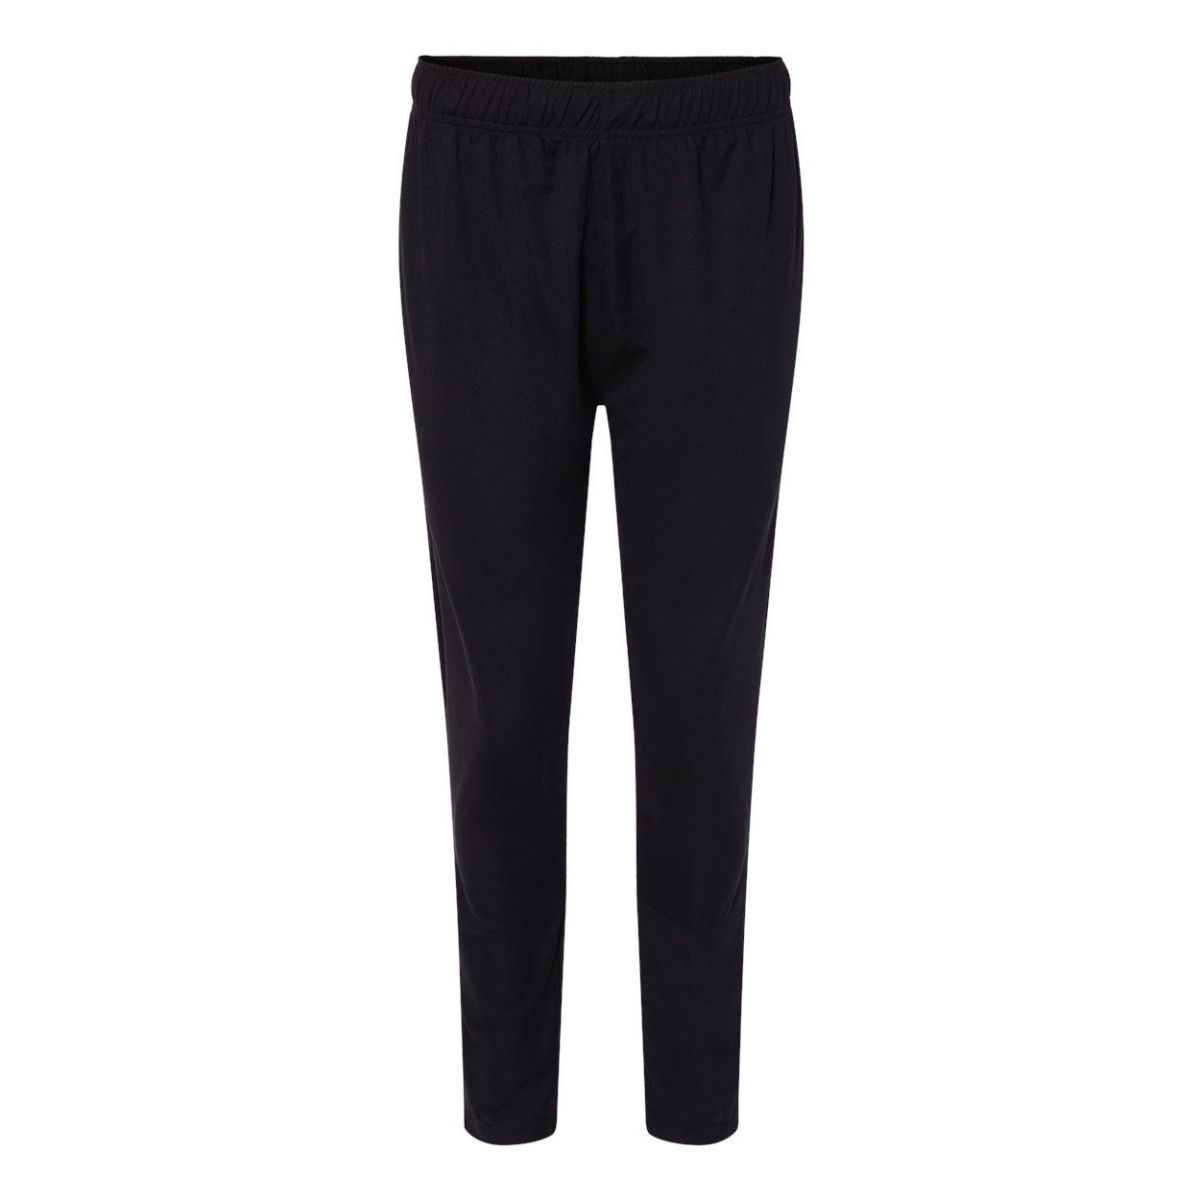 Badger Outer-Core Pants Badger